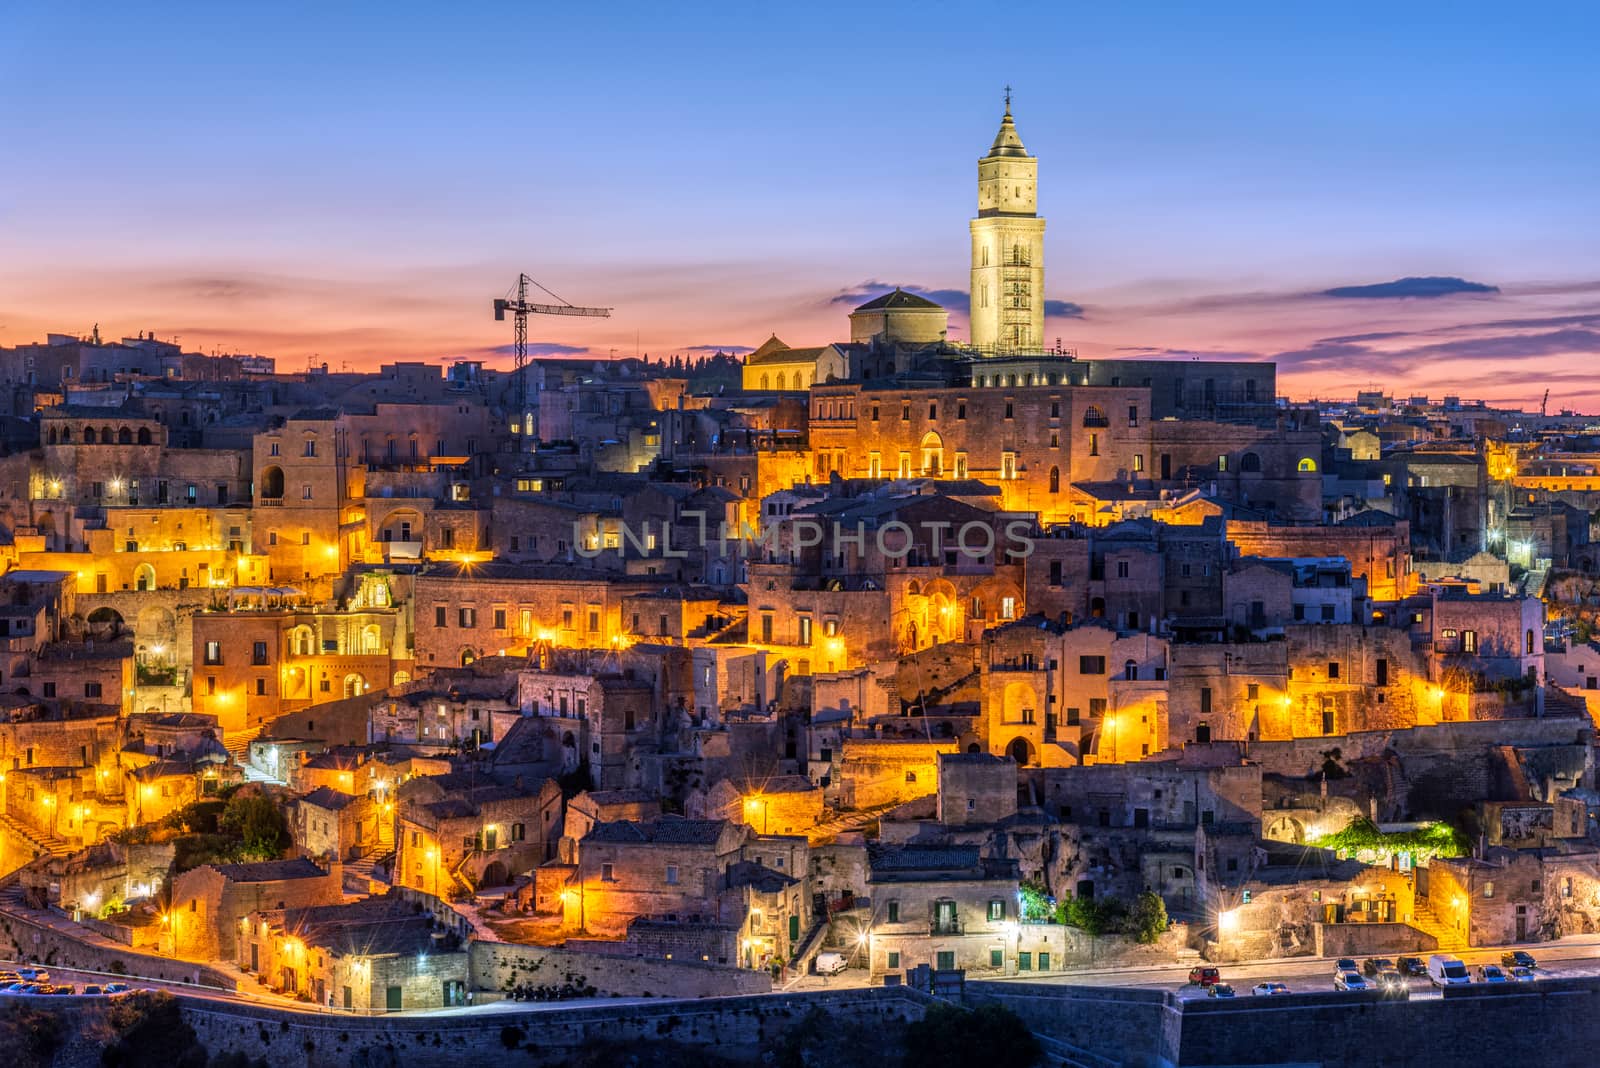 The old town of Matera in southern Italy after sunset